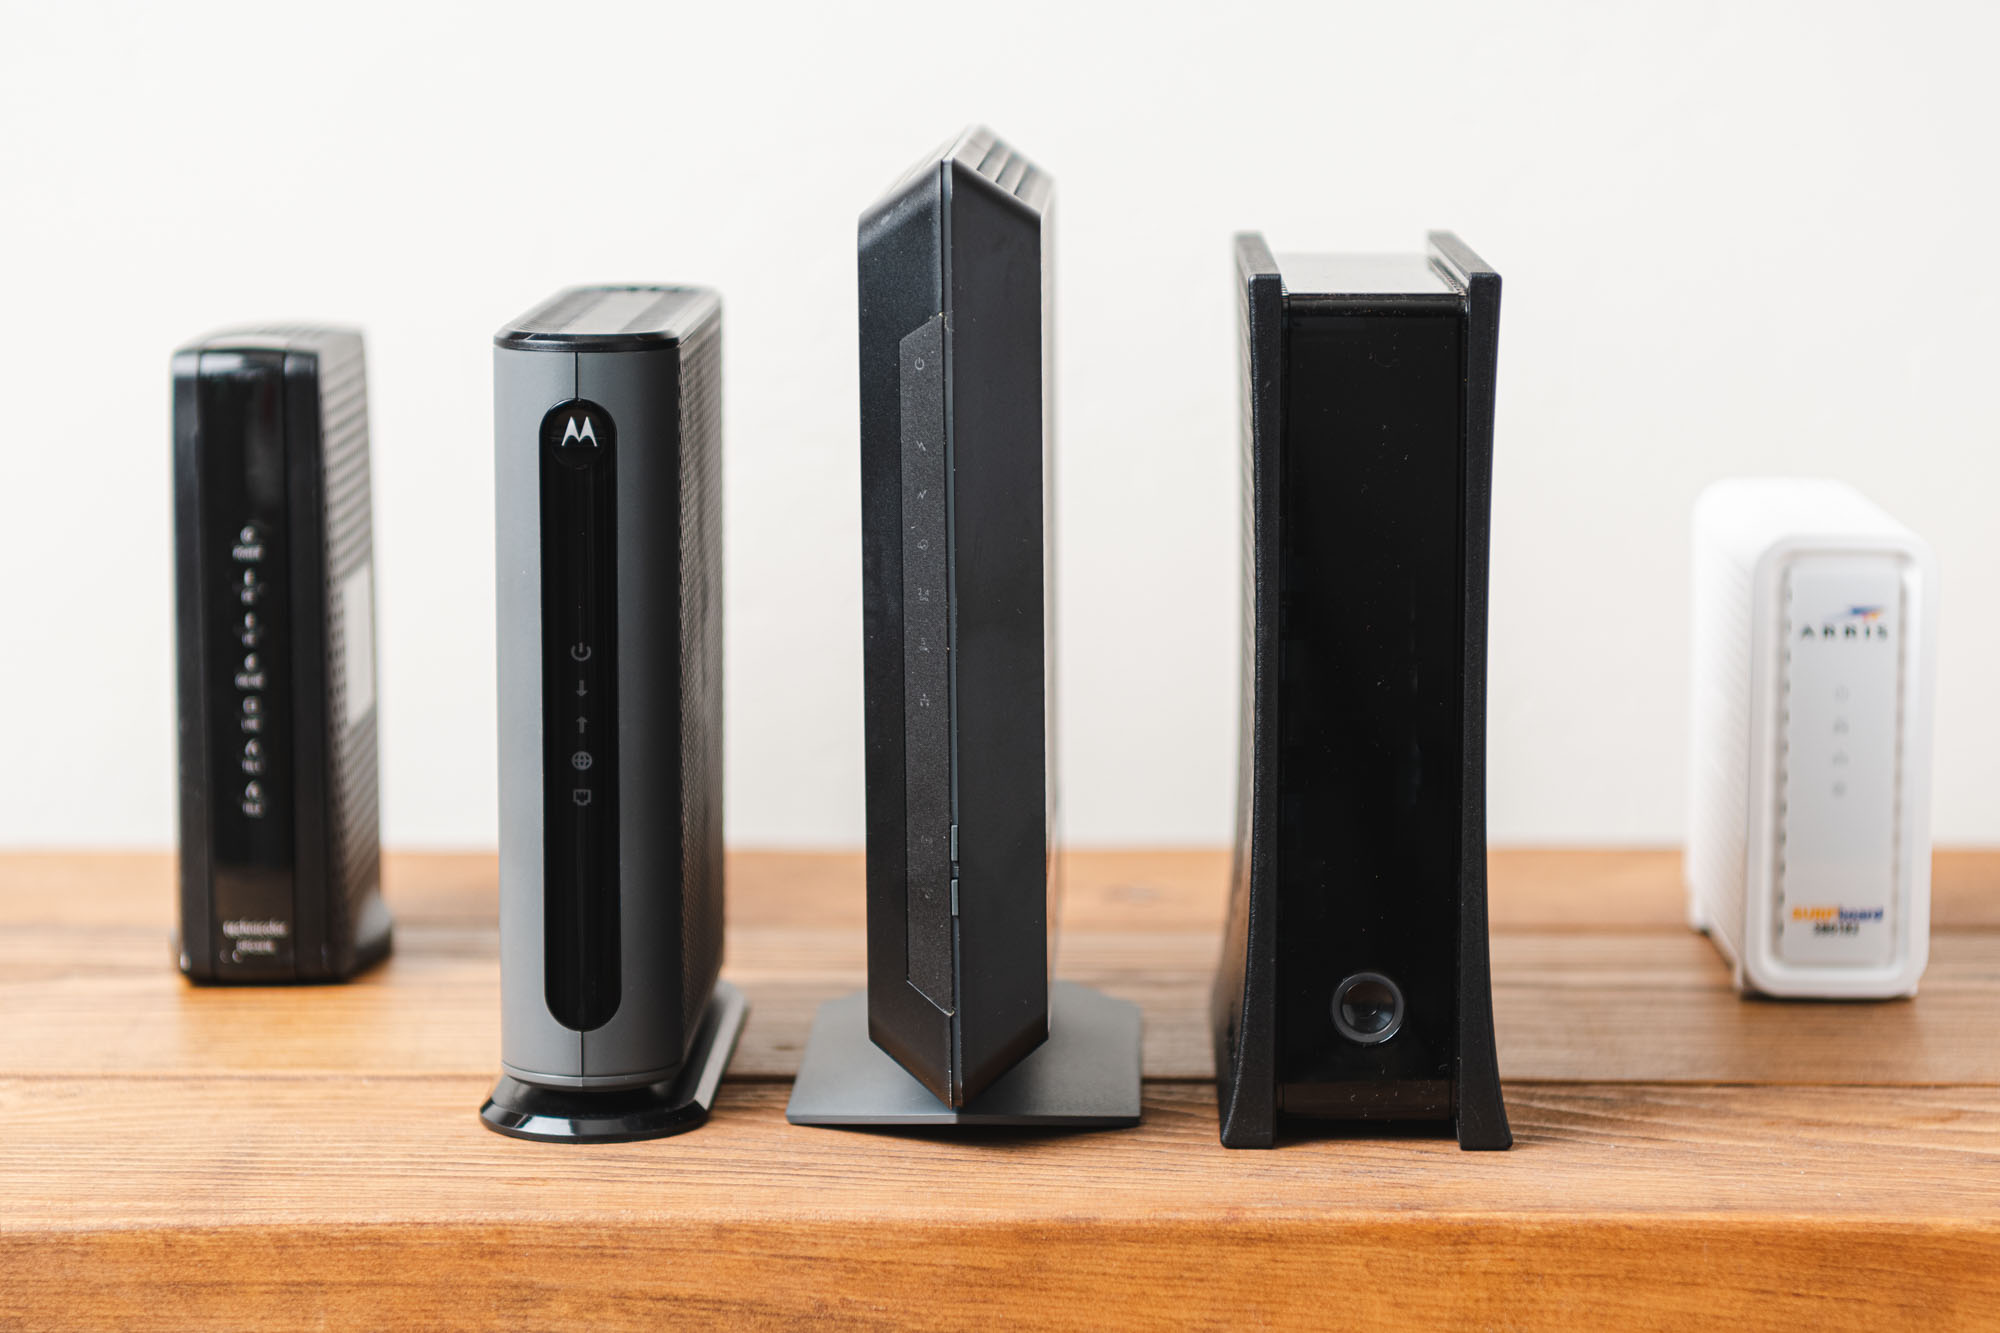 The Best Modems for Spectrum in 2021 Your Best Digs